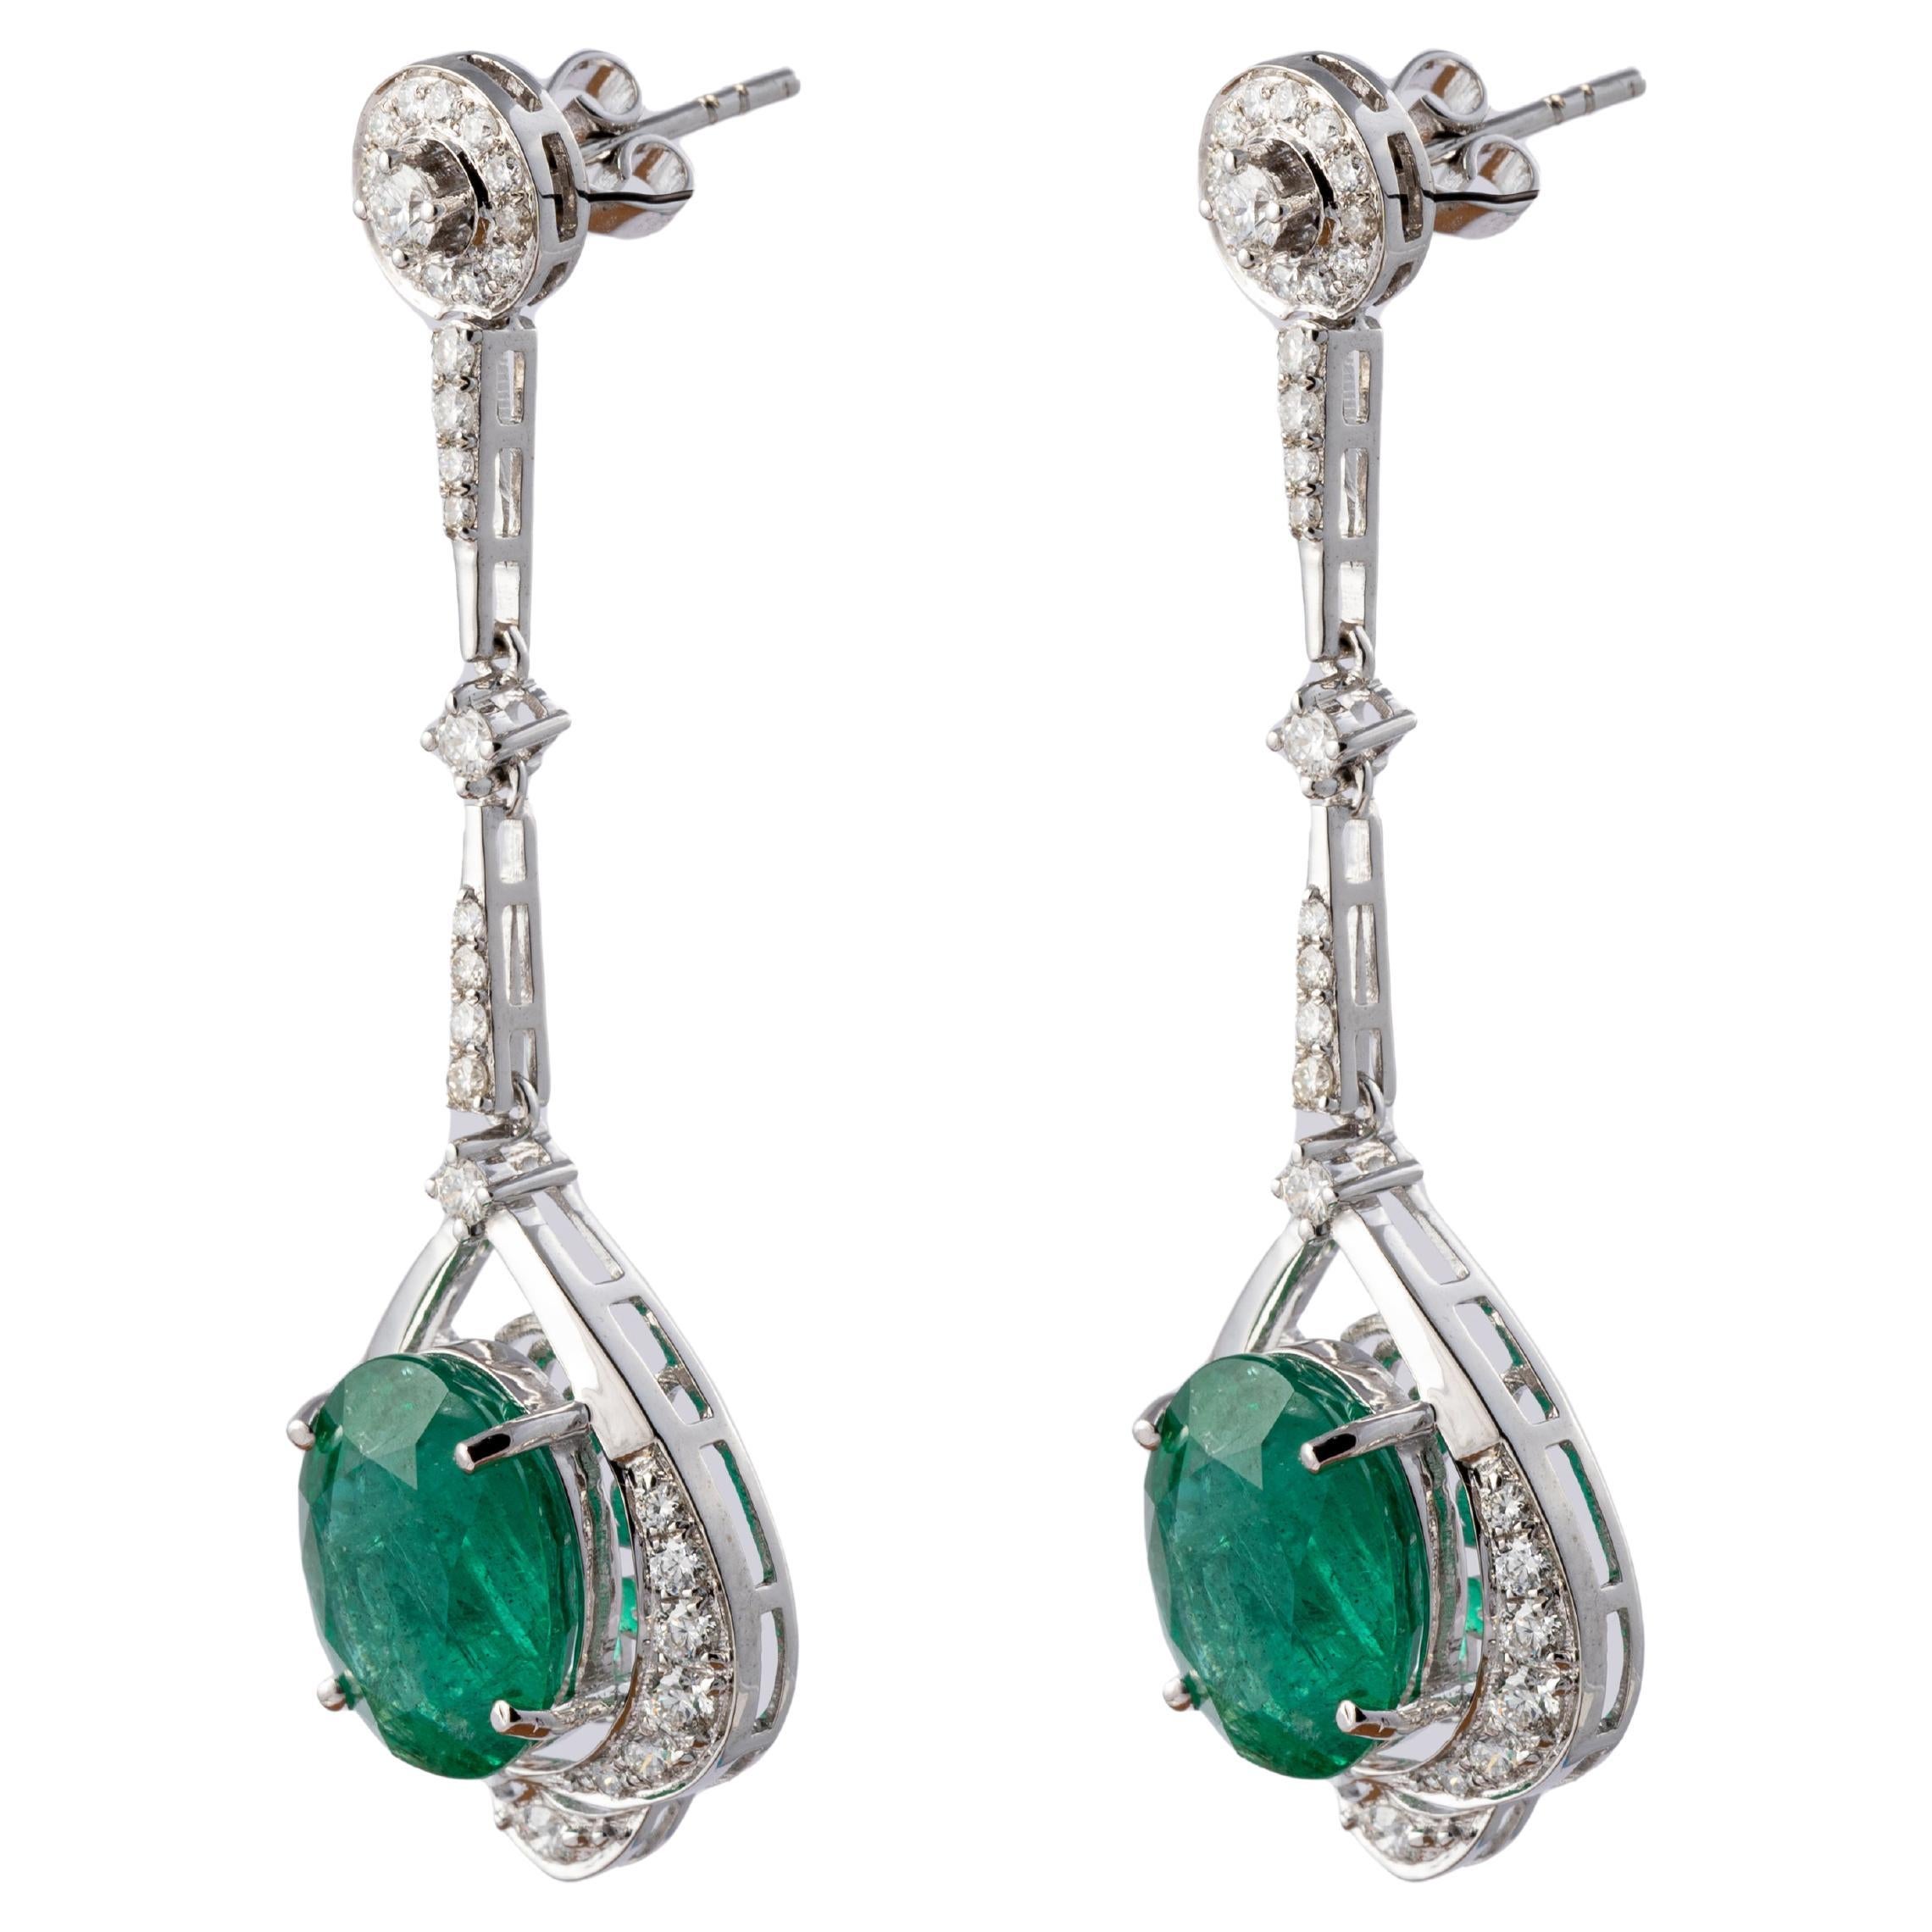 10.18cts  Zambian Emerald Earrings with 1.43cts Diamonds and 14k Gold For Sale